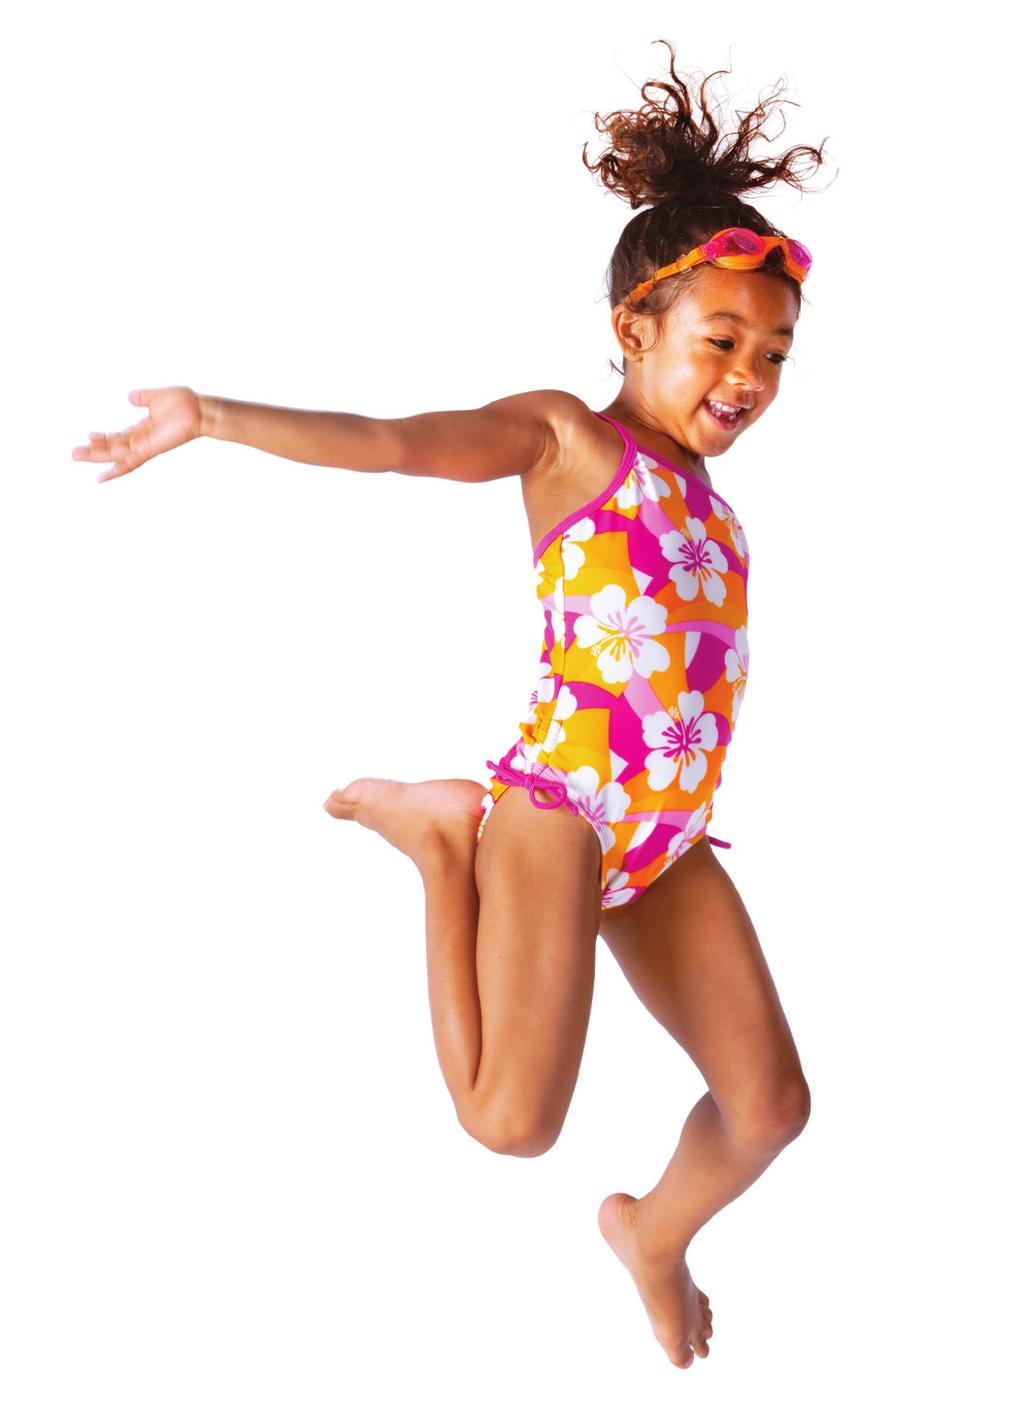 SWIM LESSONS PARENT & CHILD LESSONS This 30 minute class is for infants and toddlers, ages 6 months to 2 years, with a parent.